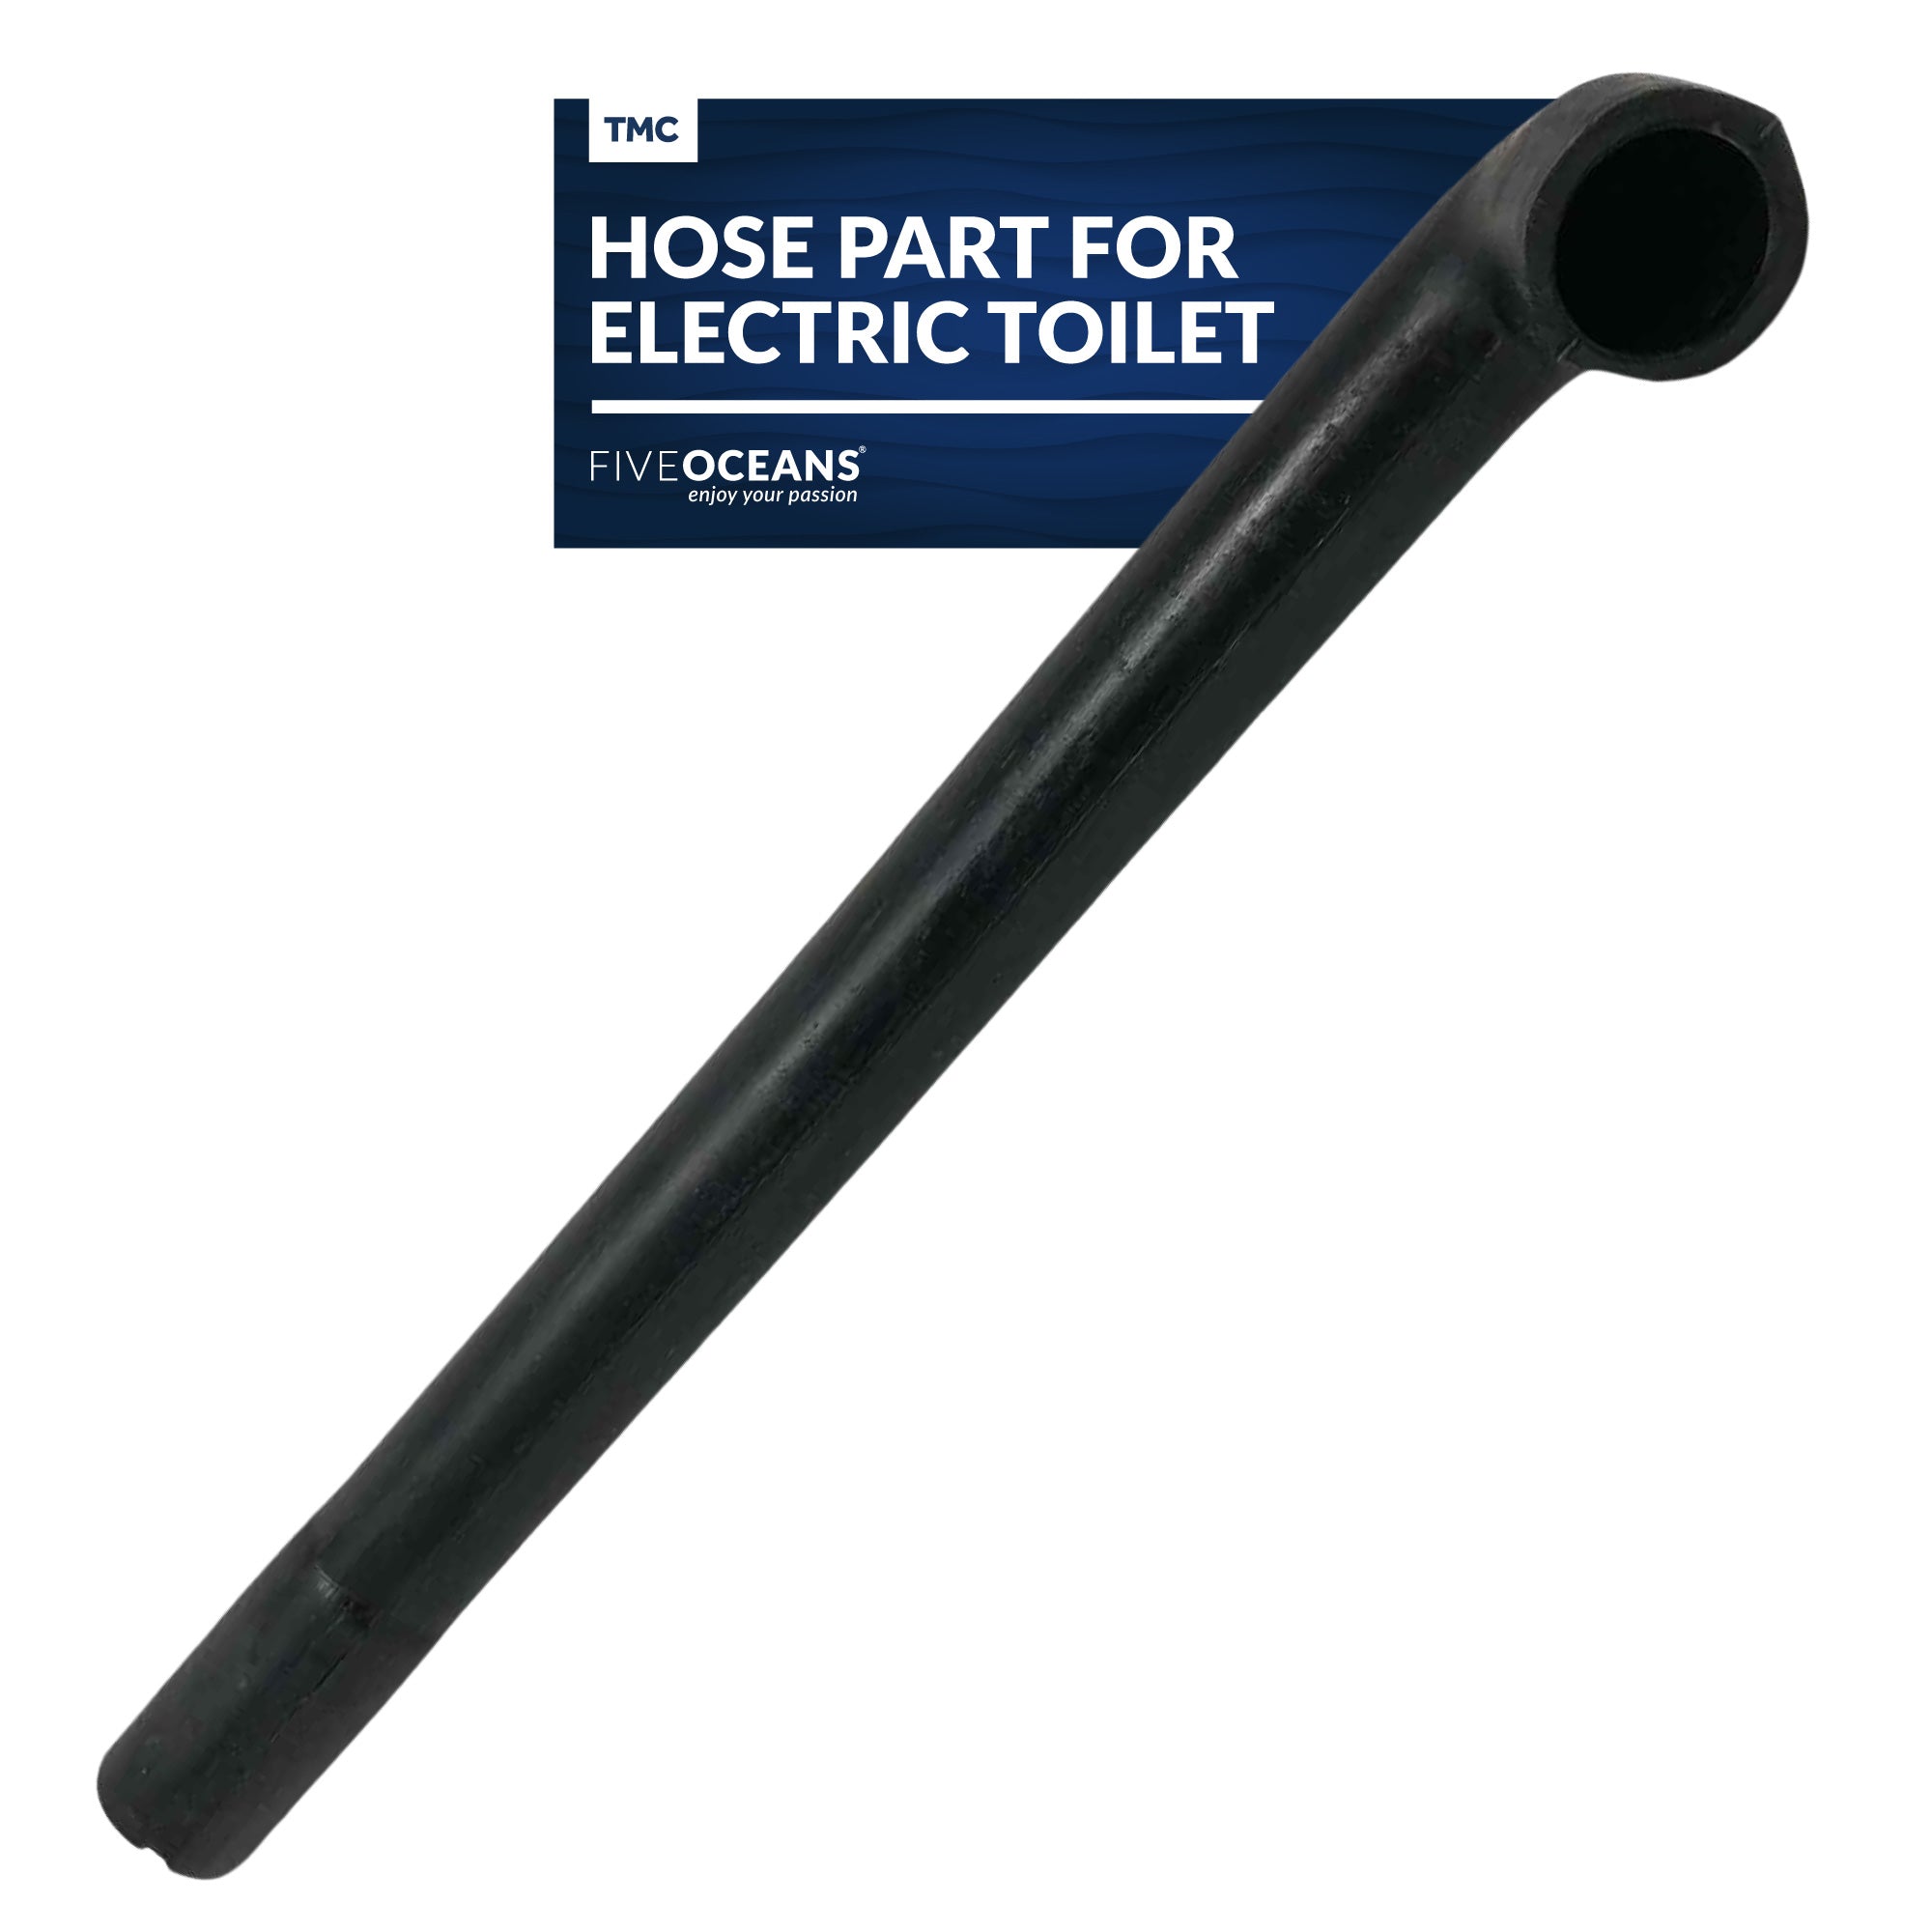 Hose Part For Electric Toilet (Rubber for FO-1599 and FO-1600) - FO3870